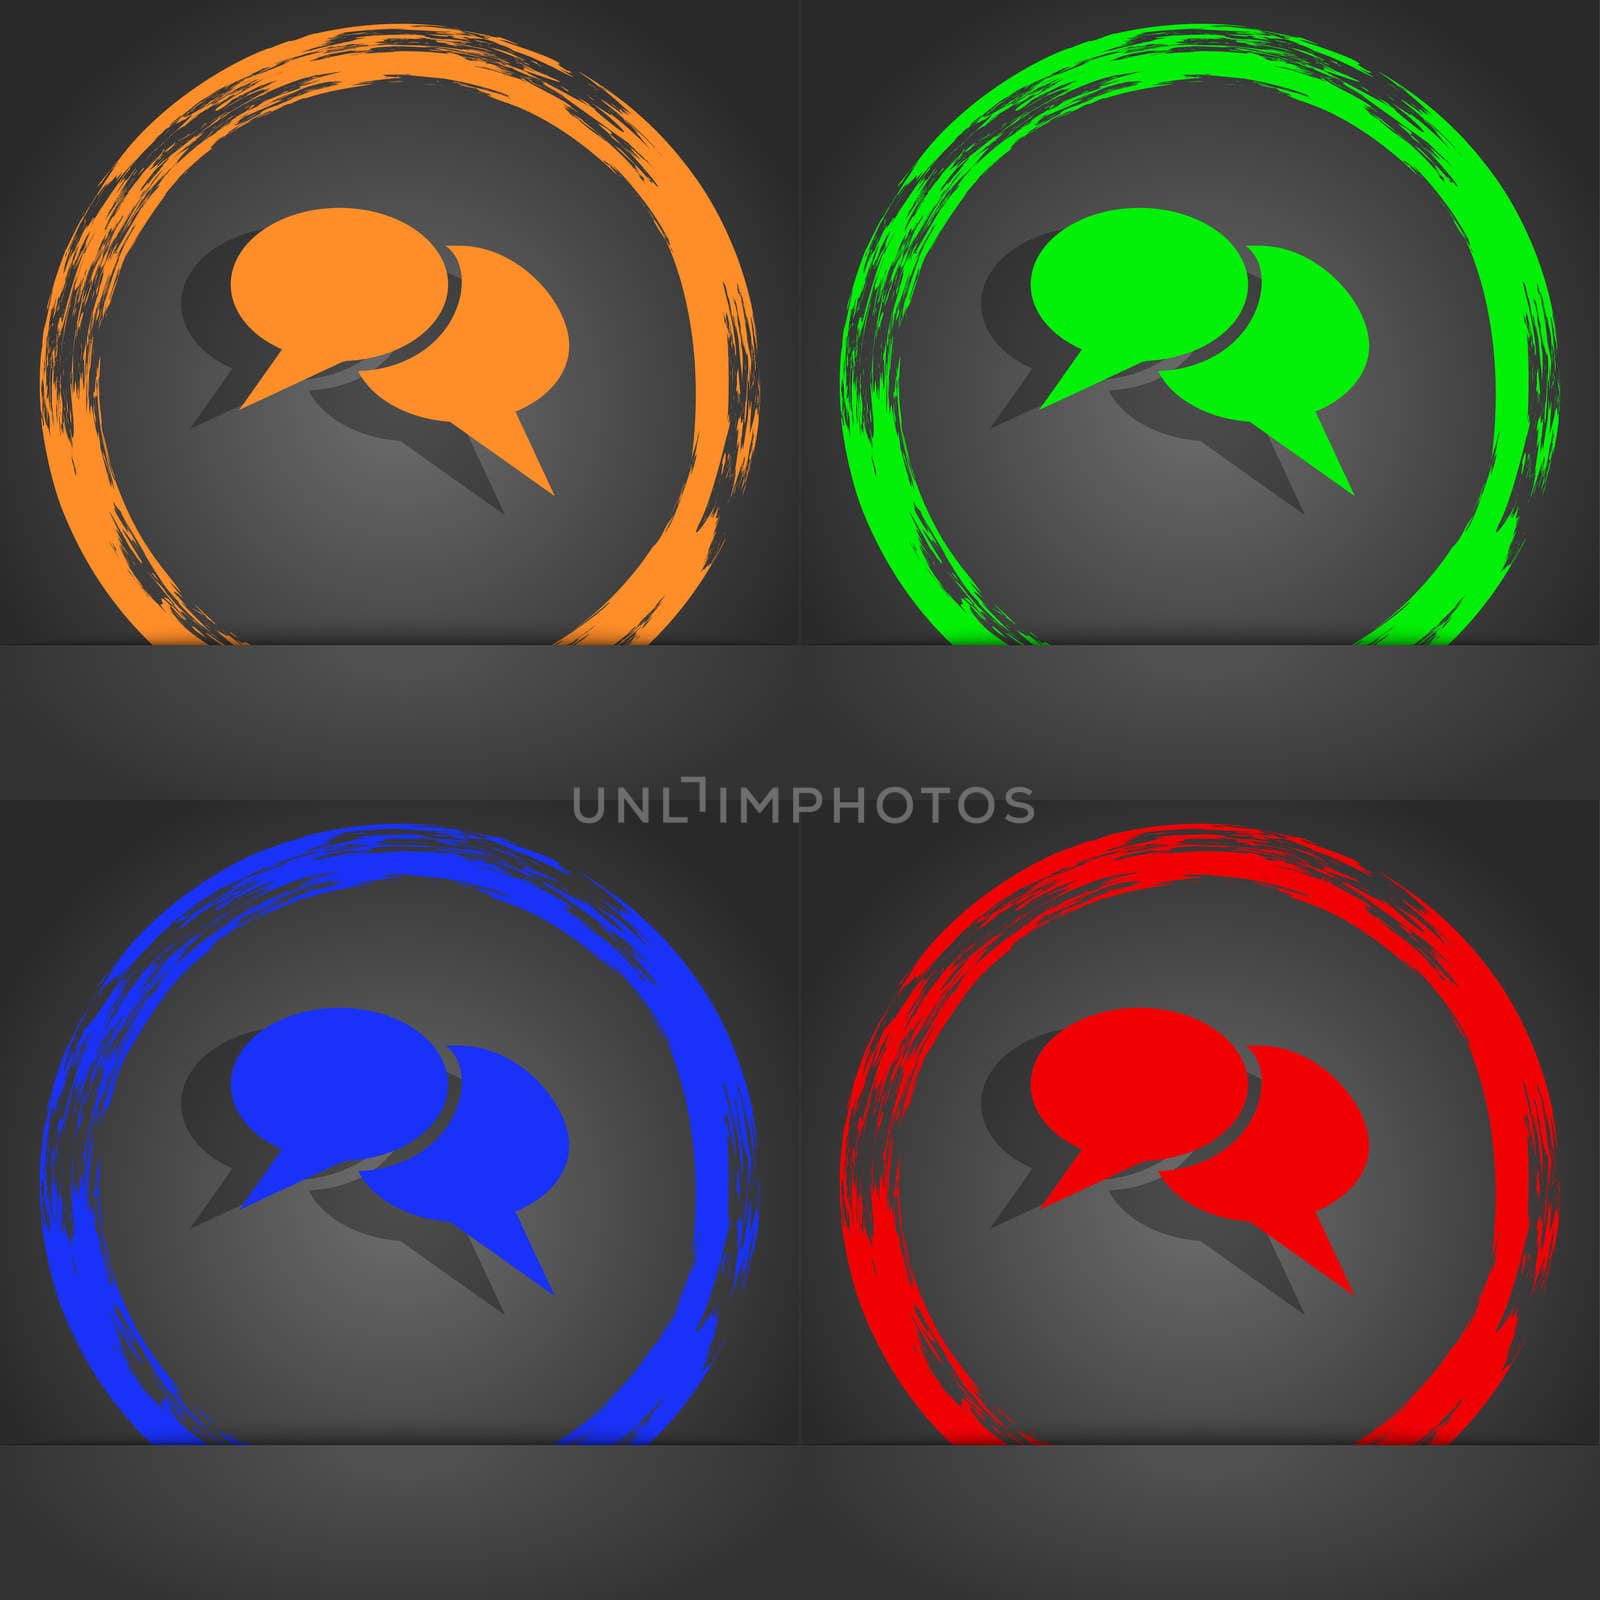 Speech bubble icons. Think cloud symbols. Fashionable modern style. In the orange, green, blue, red design.  by serhii_lohvyniuk